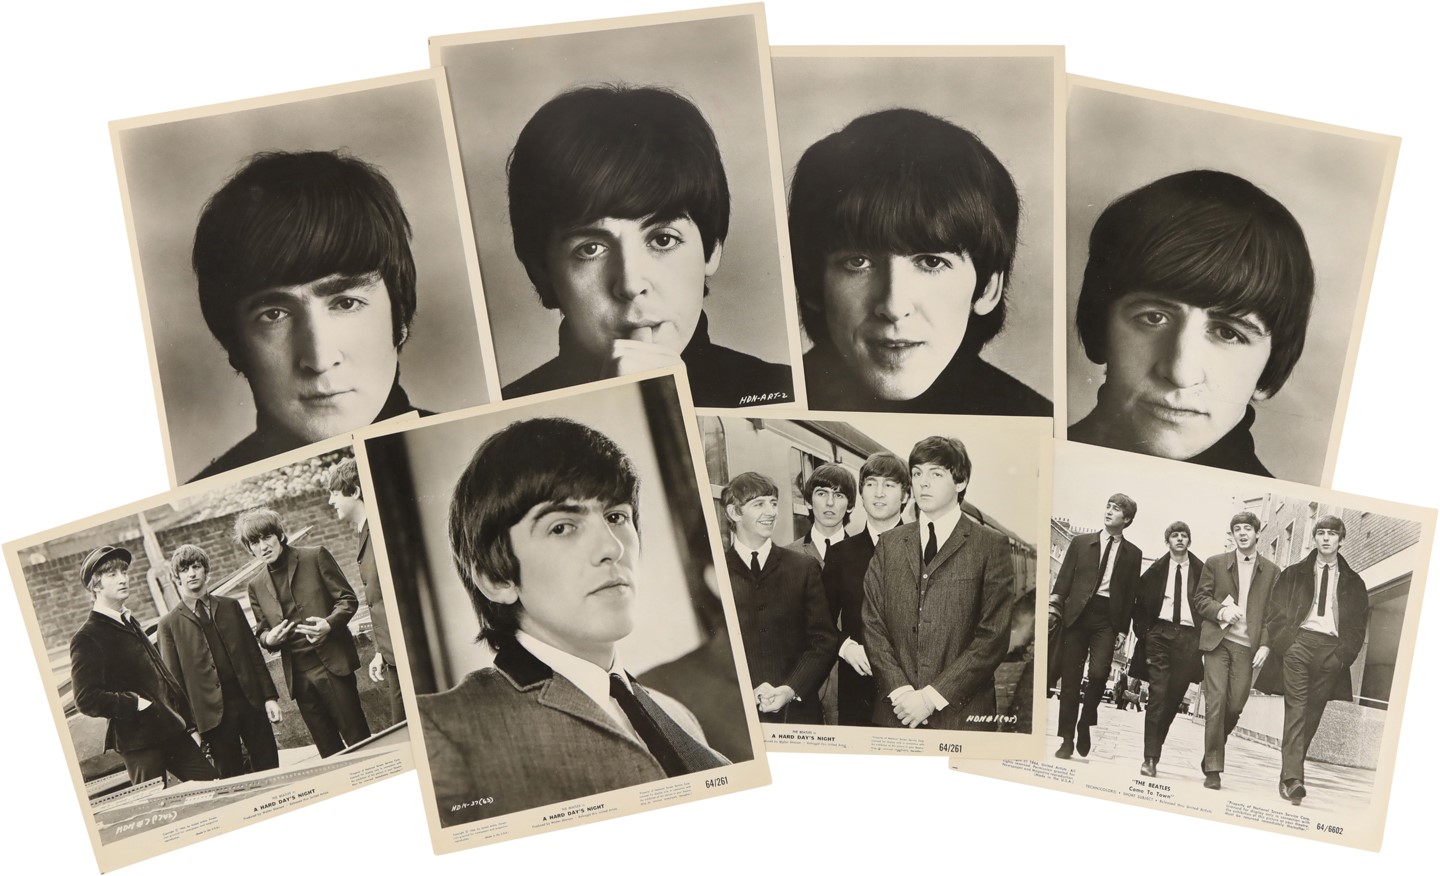 The Brown Brothers Collection - The Beatles "A Hard Day's Night" Photographs (8)